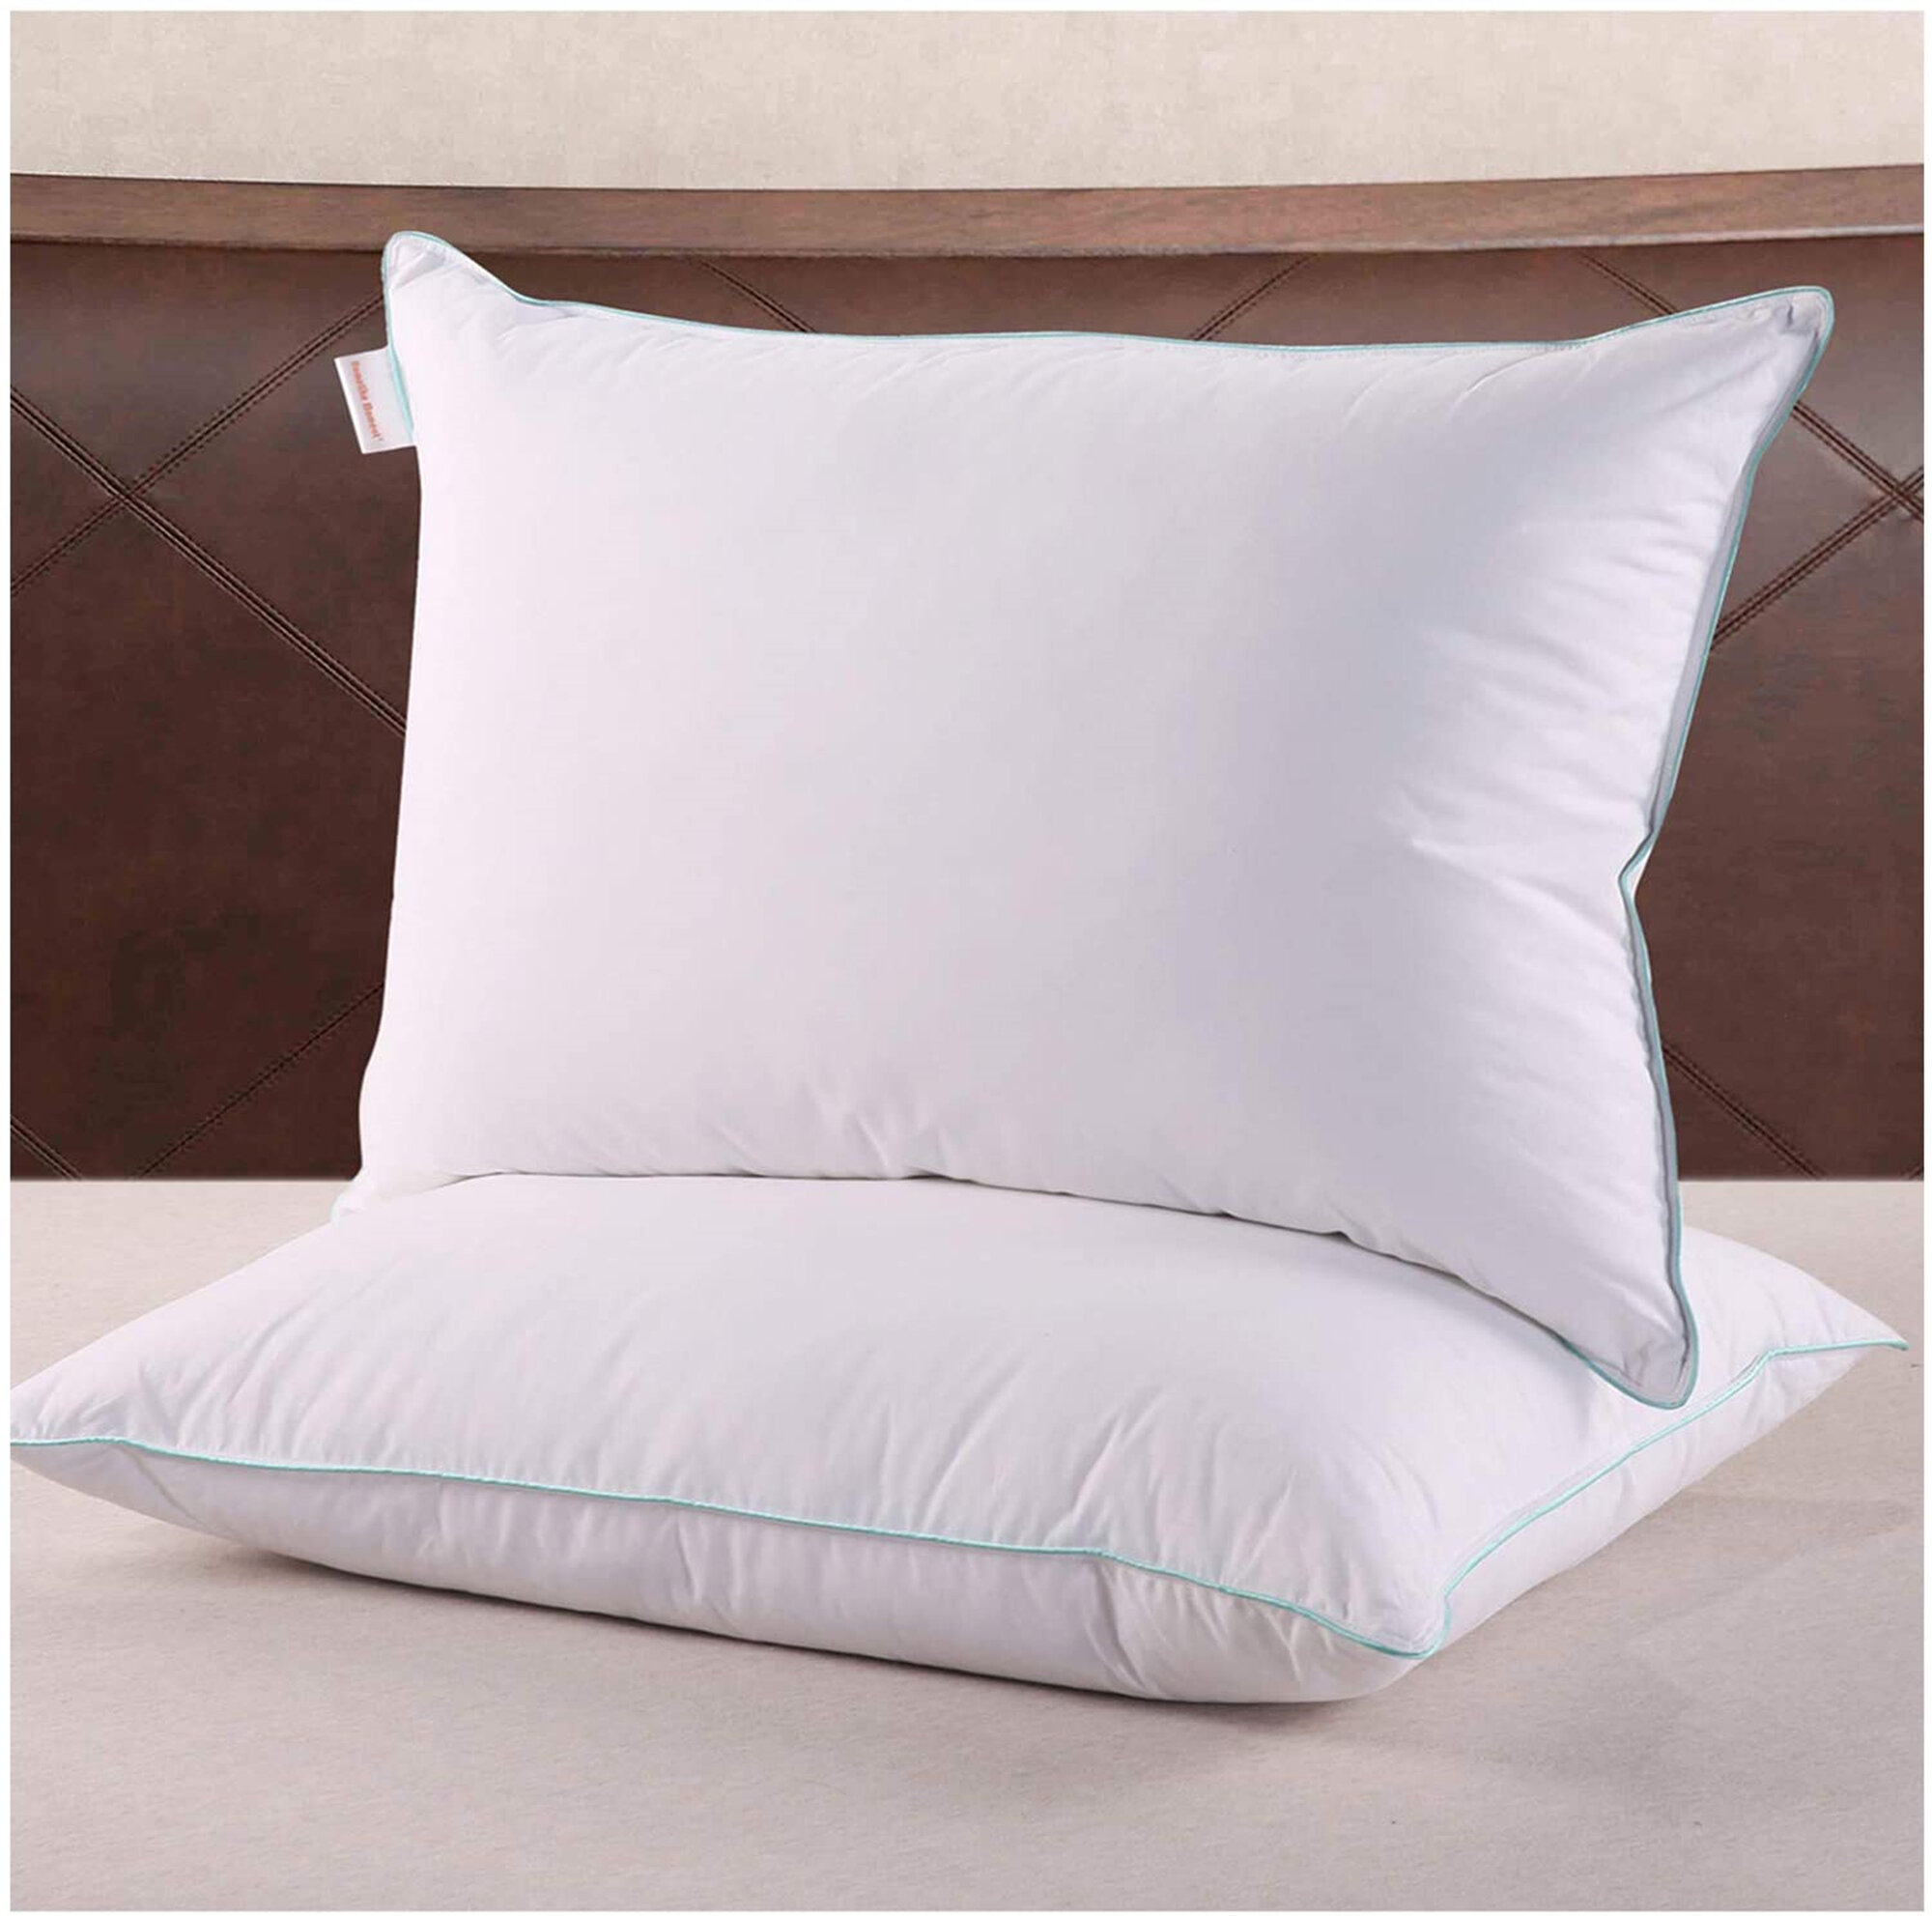 LUXURY DUCK FEATHER & DOWN Pillows Hotel Quality 2 Pack Comfortable Extra Soft